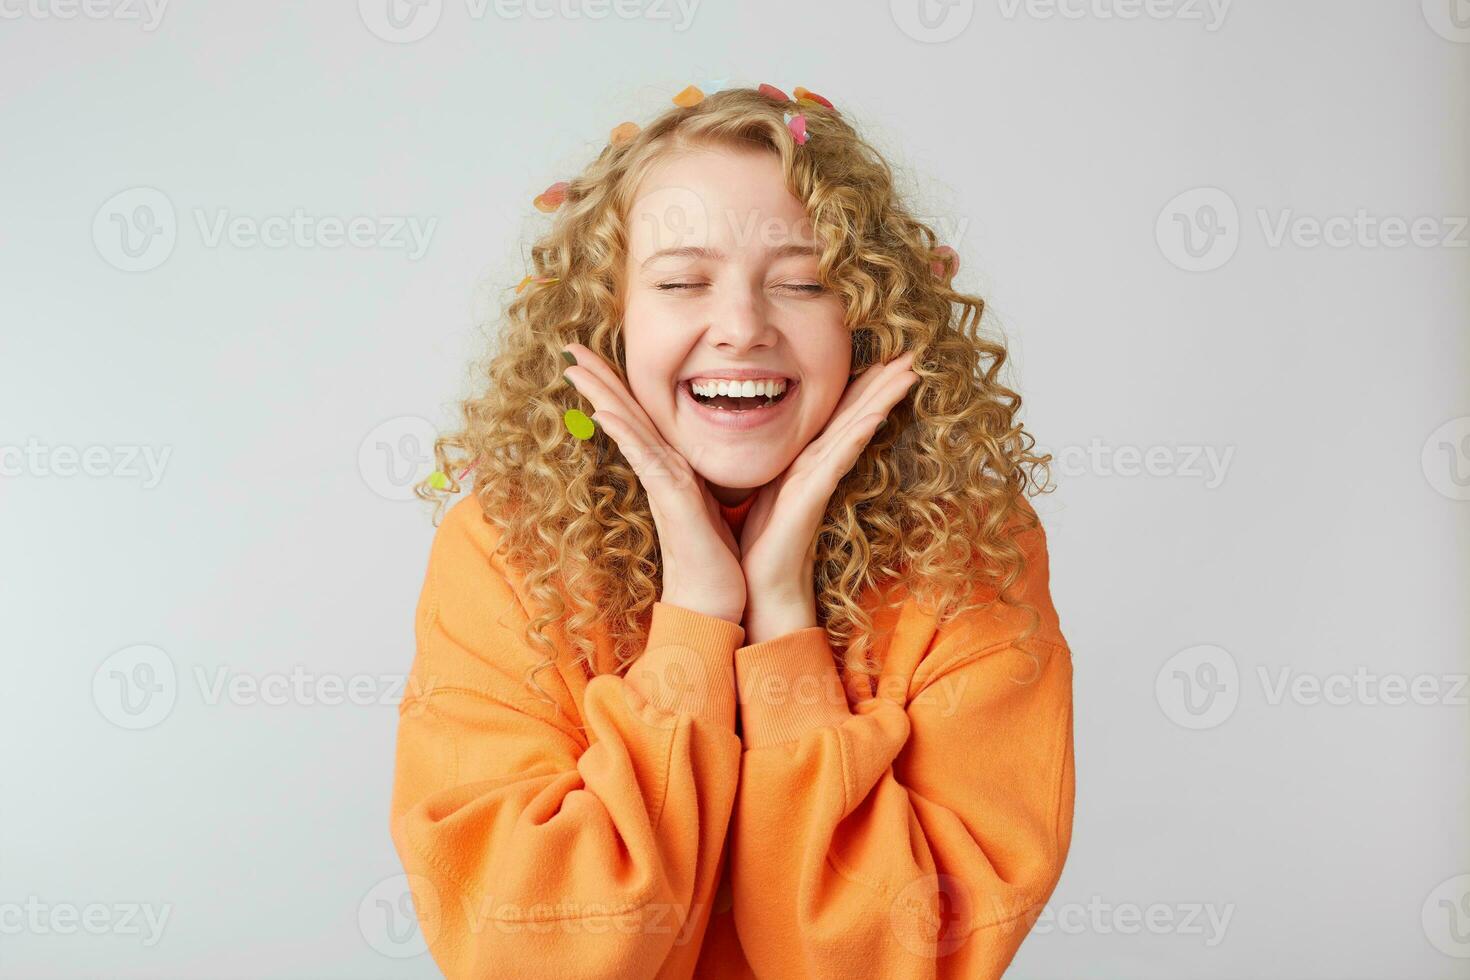 Portrait of a cheerful beautiful girl wearing orange sweater keeps palms near face celebrating with eyes closed in pleasure isolated over white background photo